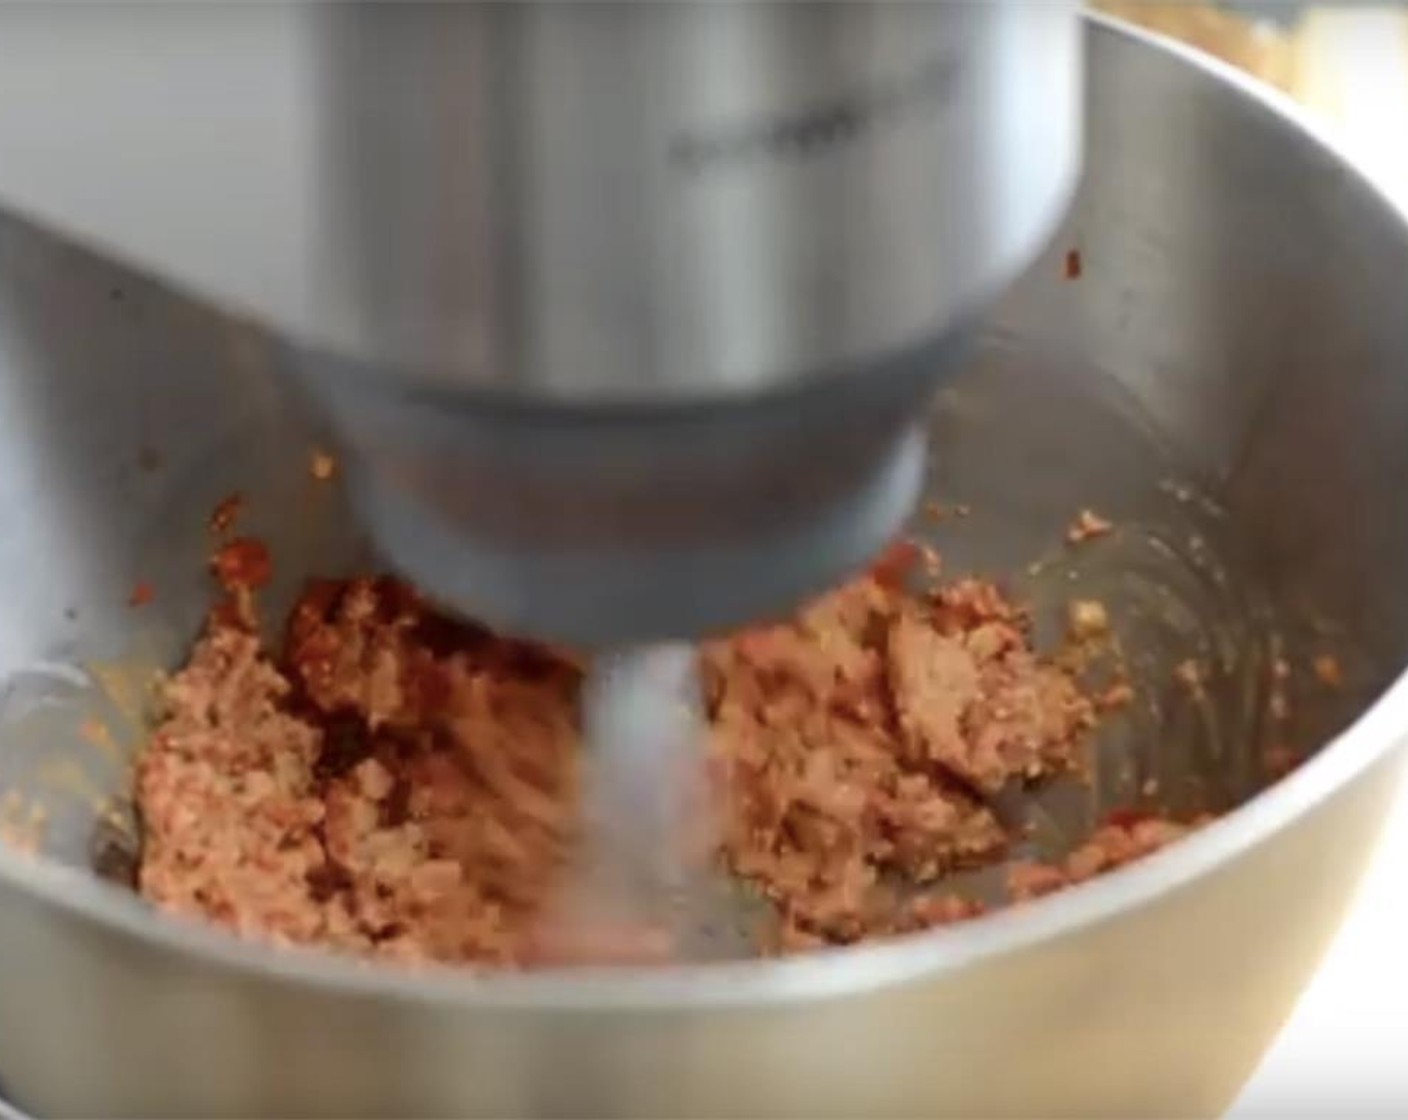 step 3 Add 3 tablespoons of the bell pepper mixture into a stand mixer, food processor or mixing bowl. Add Breadcrumbs (1 cup), Paprika (1 tsp), Ground Cumin (1 tsp), Pomegranate Molasses (3 Tbsp) and Olive Oil (1/4 cup). Add the Water (1/2 cup) gradually to achieve your desired consistency.